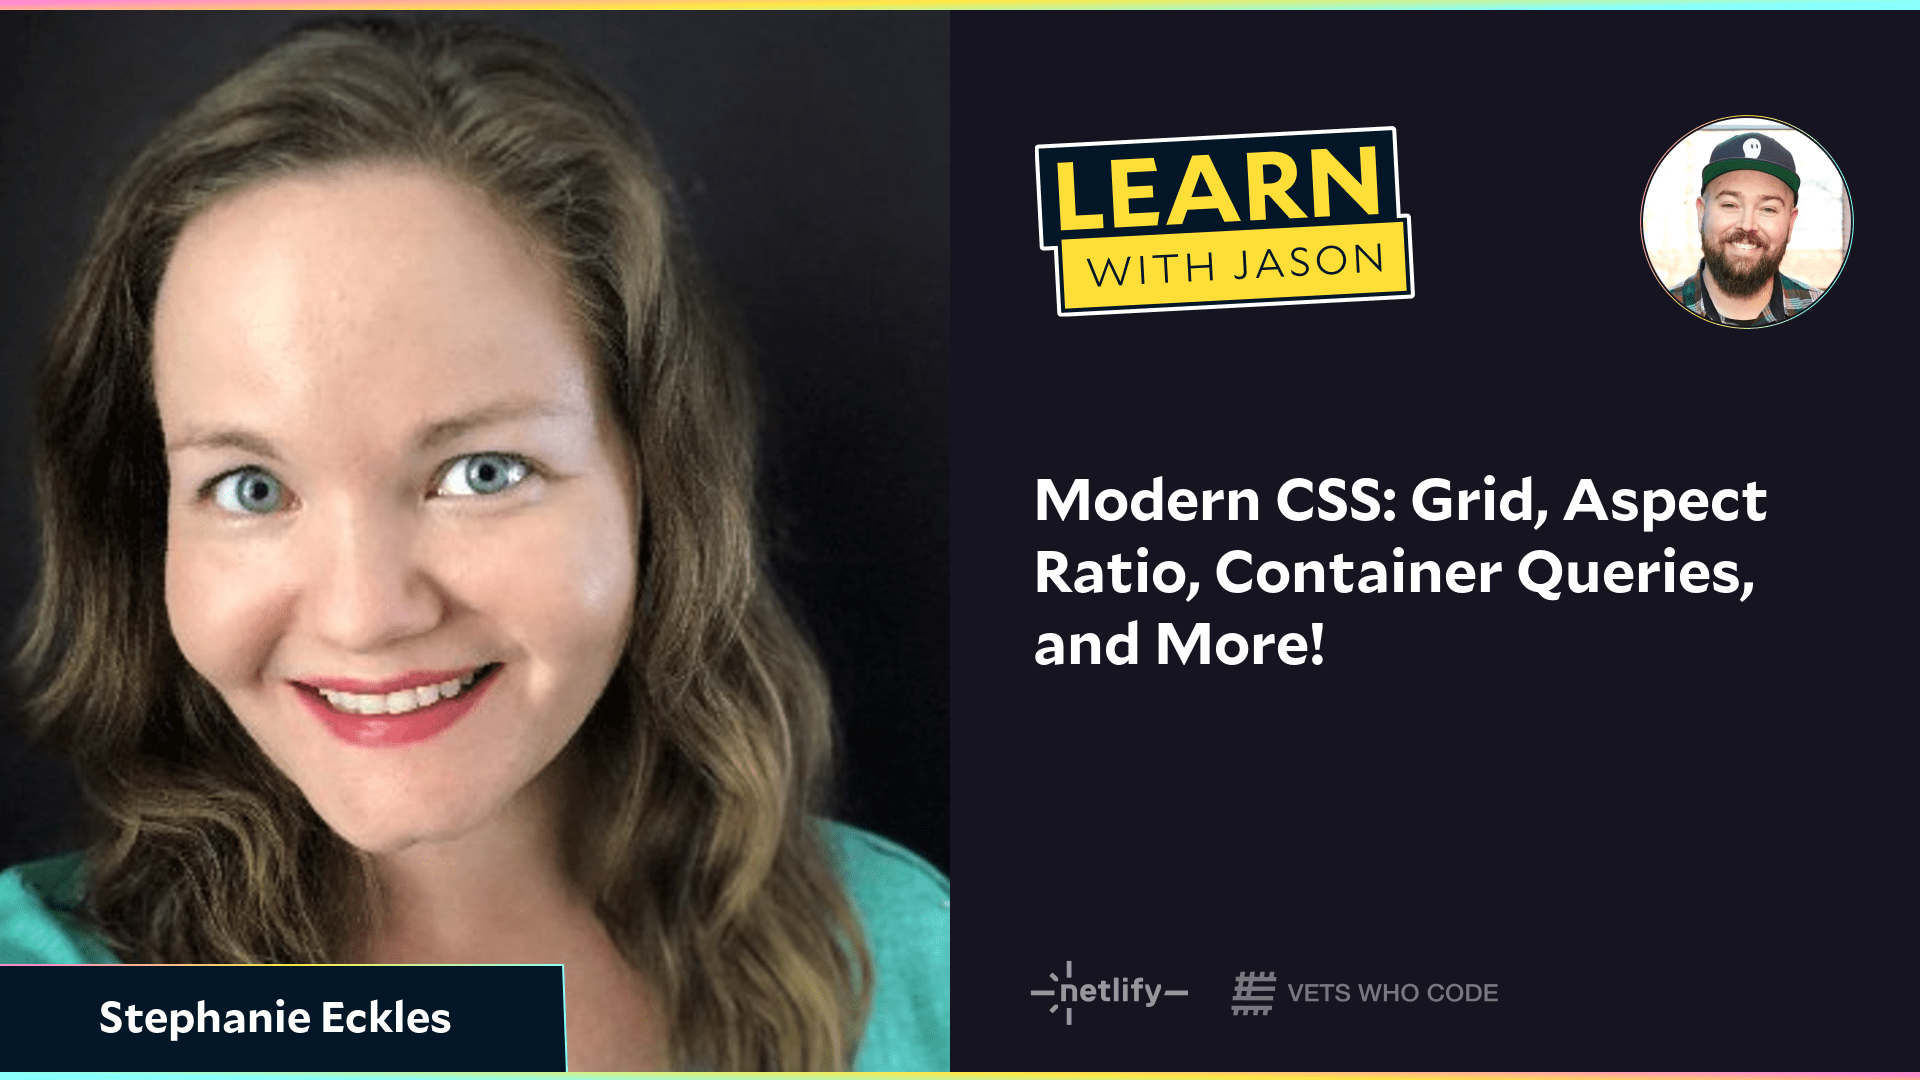 Modern CSS: Grid, Aspect Ratio, Container Queries, and More! (with Stephanie Eckles)